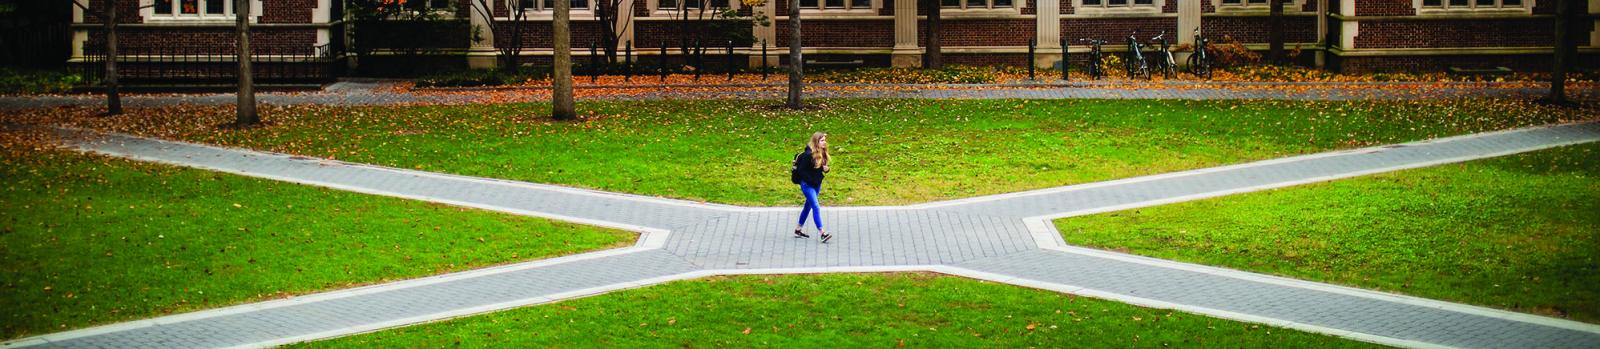 Penn student stands in the middle of path intersecting with other walkways. 